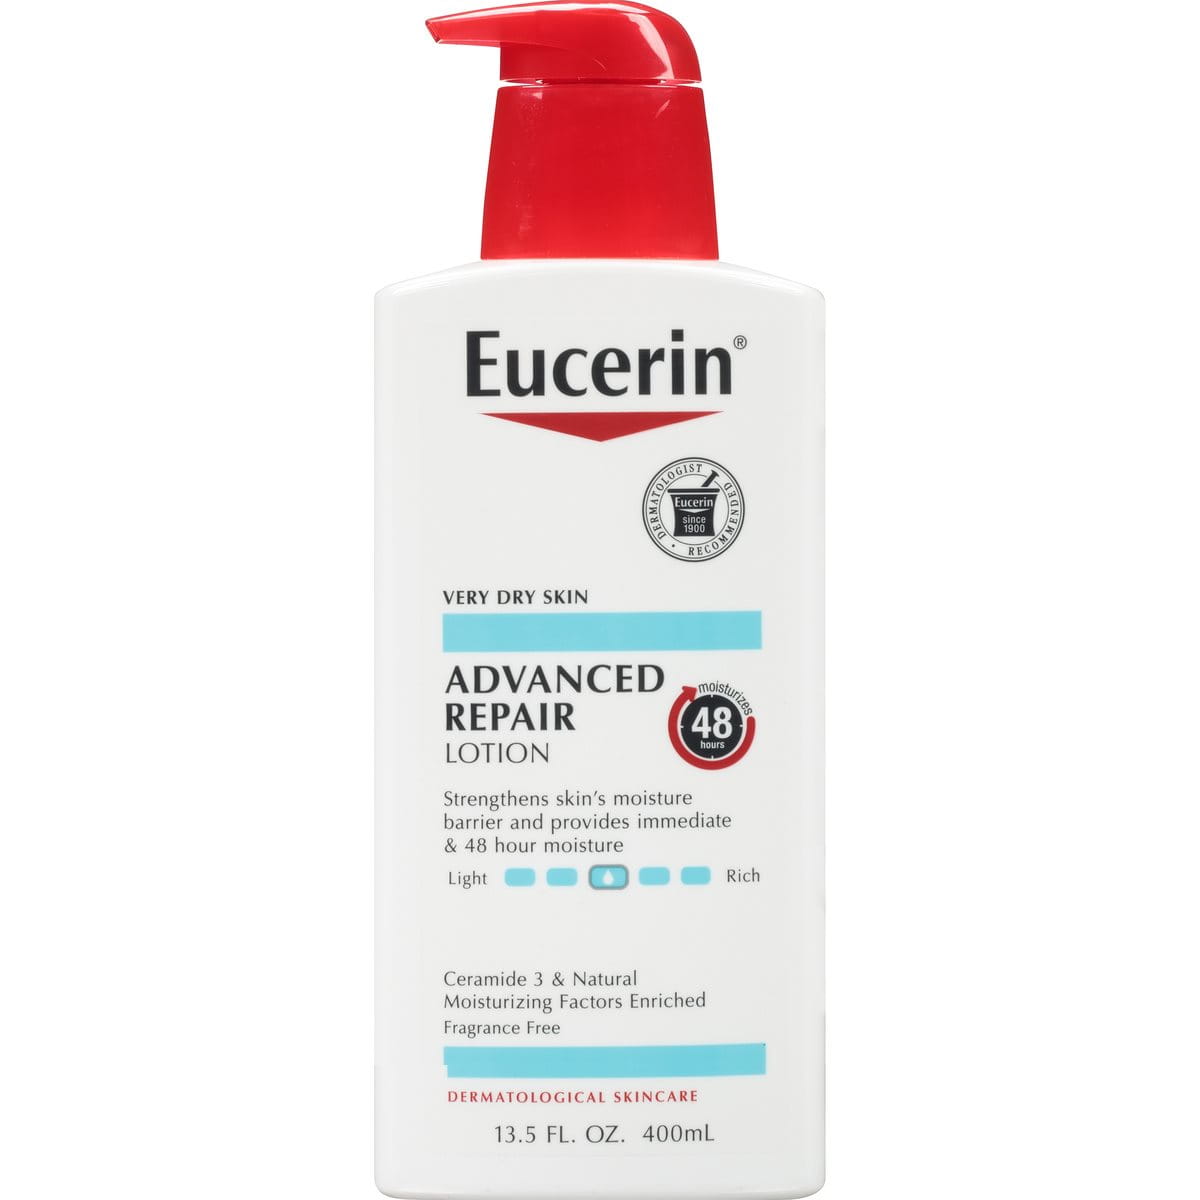 The Best SPF For Combination Acne Prone Skin I've Tried – Review Of Eucerin  Oil Control SPF 50 Sun Gel Cream – Forever Saving For A Rainy Day